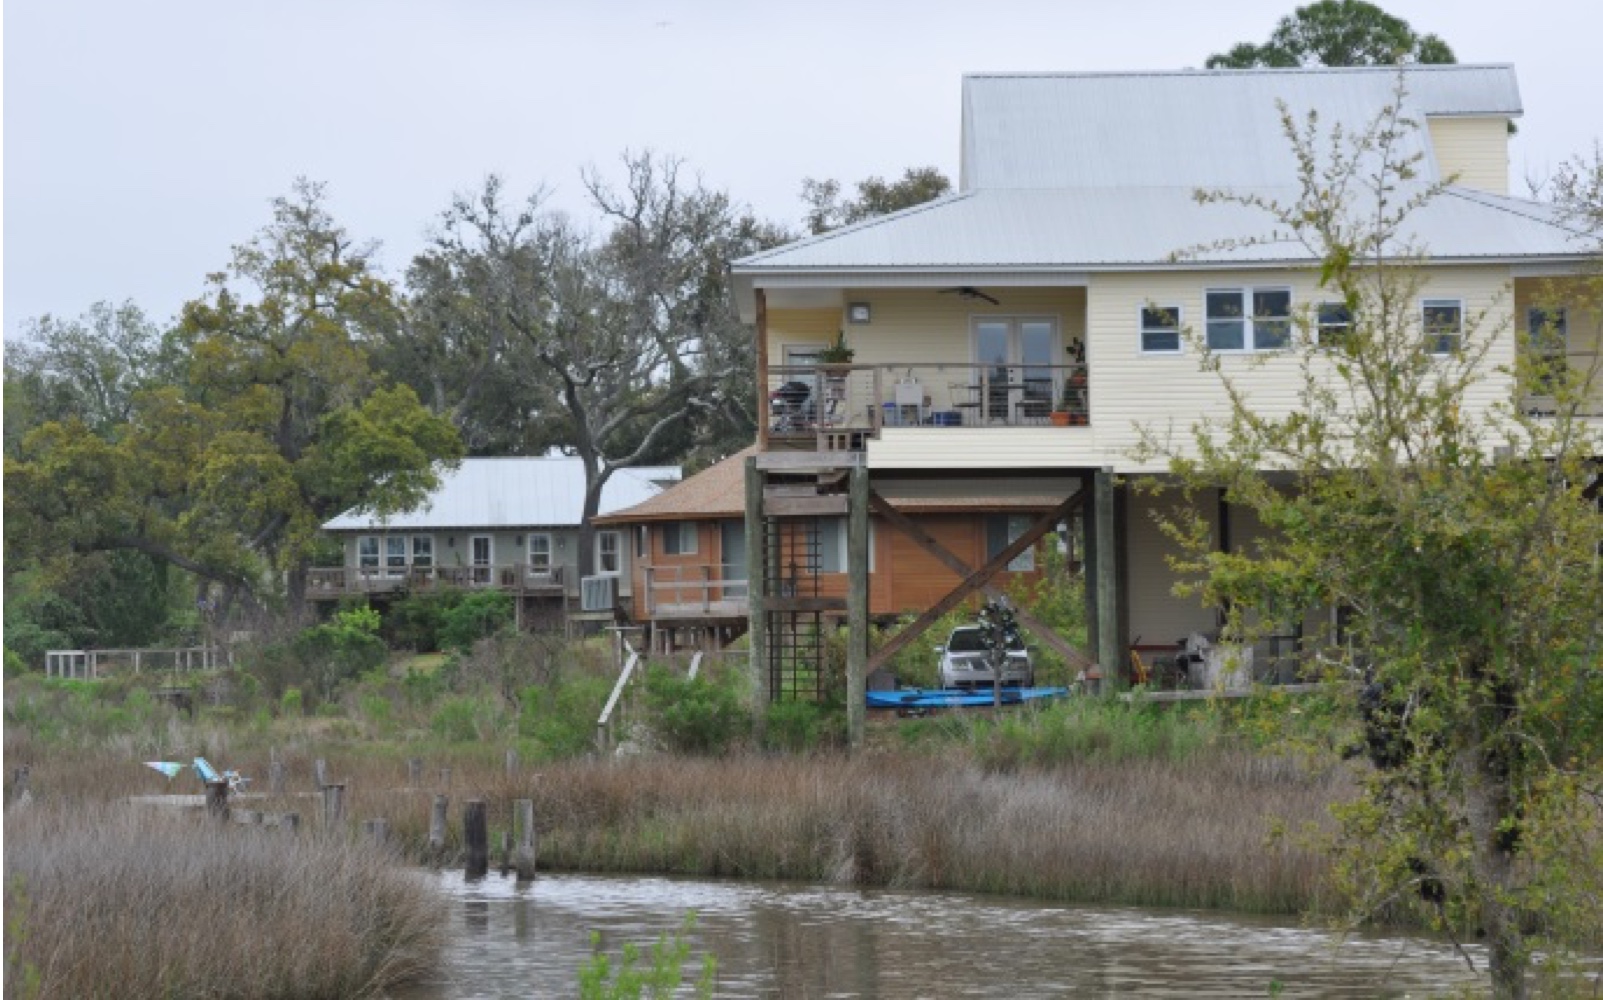 House on the Gulf with increased height to avoid flooding